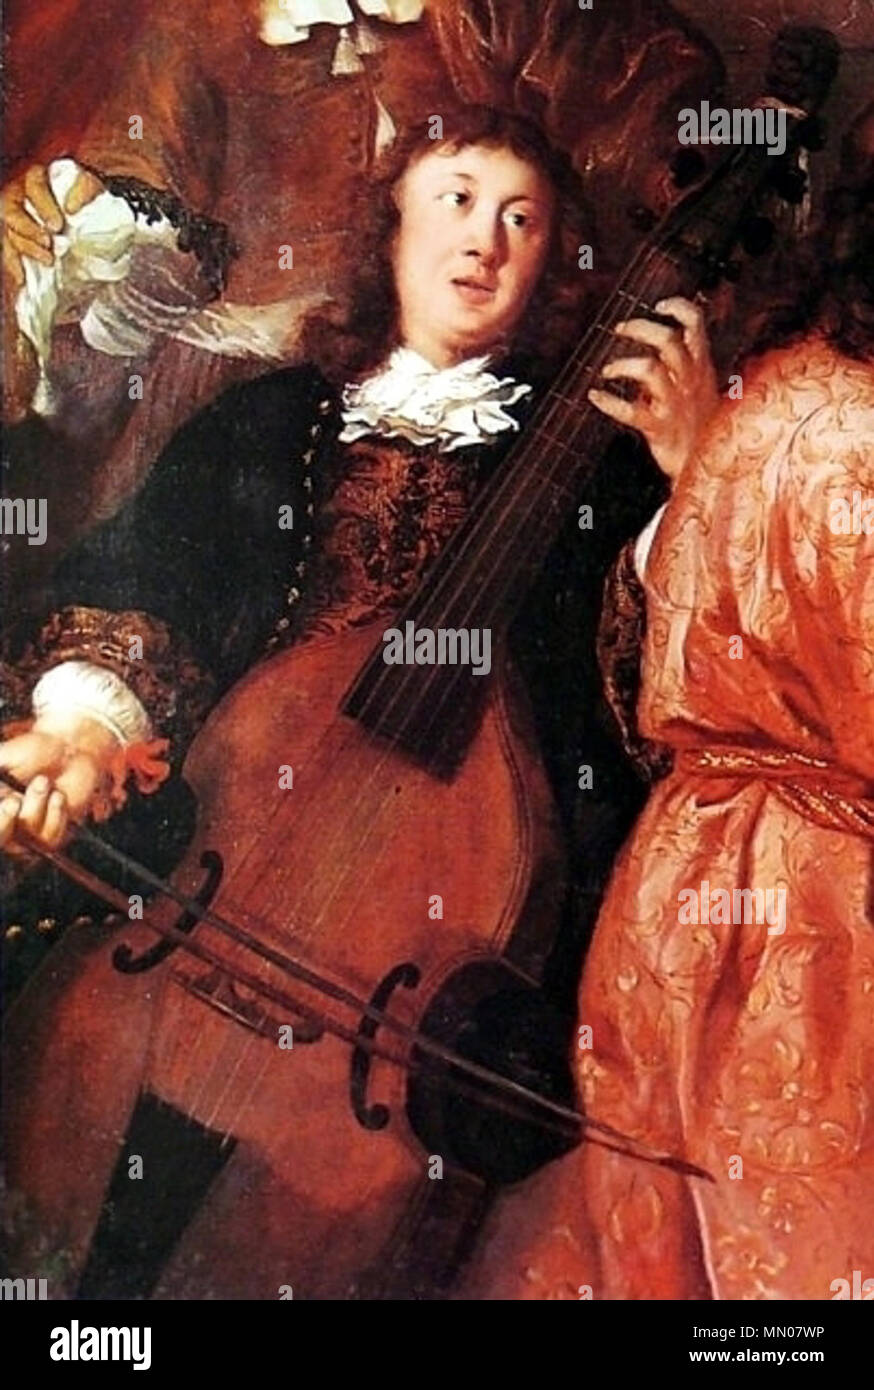 . The picture shows Dietrich Buxtehude playing a viol.  Häusliche Musikszene. detail   Johannes Voorhout  (1647–1723)     Alternative names Johannes Voorhout (I), I. van Hout, Jan Voorhout (I)  Description Dutch painter, draughtsman and ornamental painter  Date of birth/death 11 November 1647 before 12 May 1723  Location of birth/death Uithoorn Amsterdam  Work period from 1662 until 1723  Work location Gouda (1662-1664), Amsterdam (1664-1672), Friedrichstadt (1672), Hamburg (1677), Amsterdam (1677-1723)  Authority control  : Q163501 VIAF:?80397322 ULAN:?500010299 GND:?135972965 BPN:?22884841 K Stock Photo